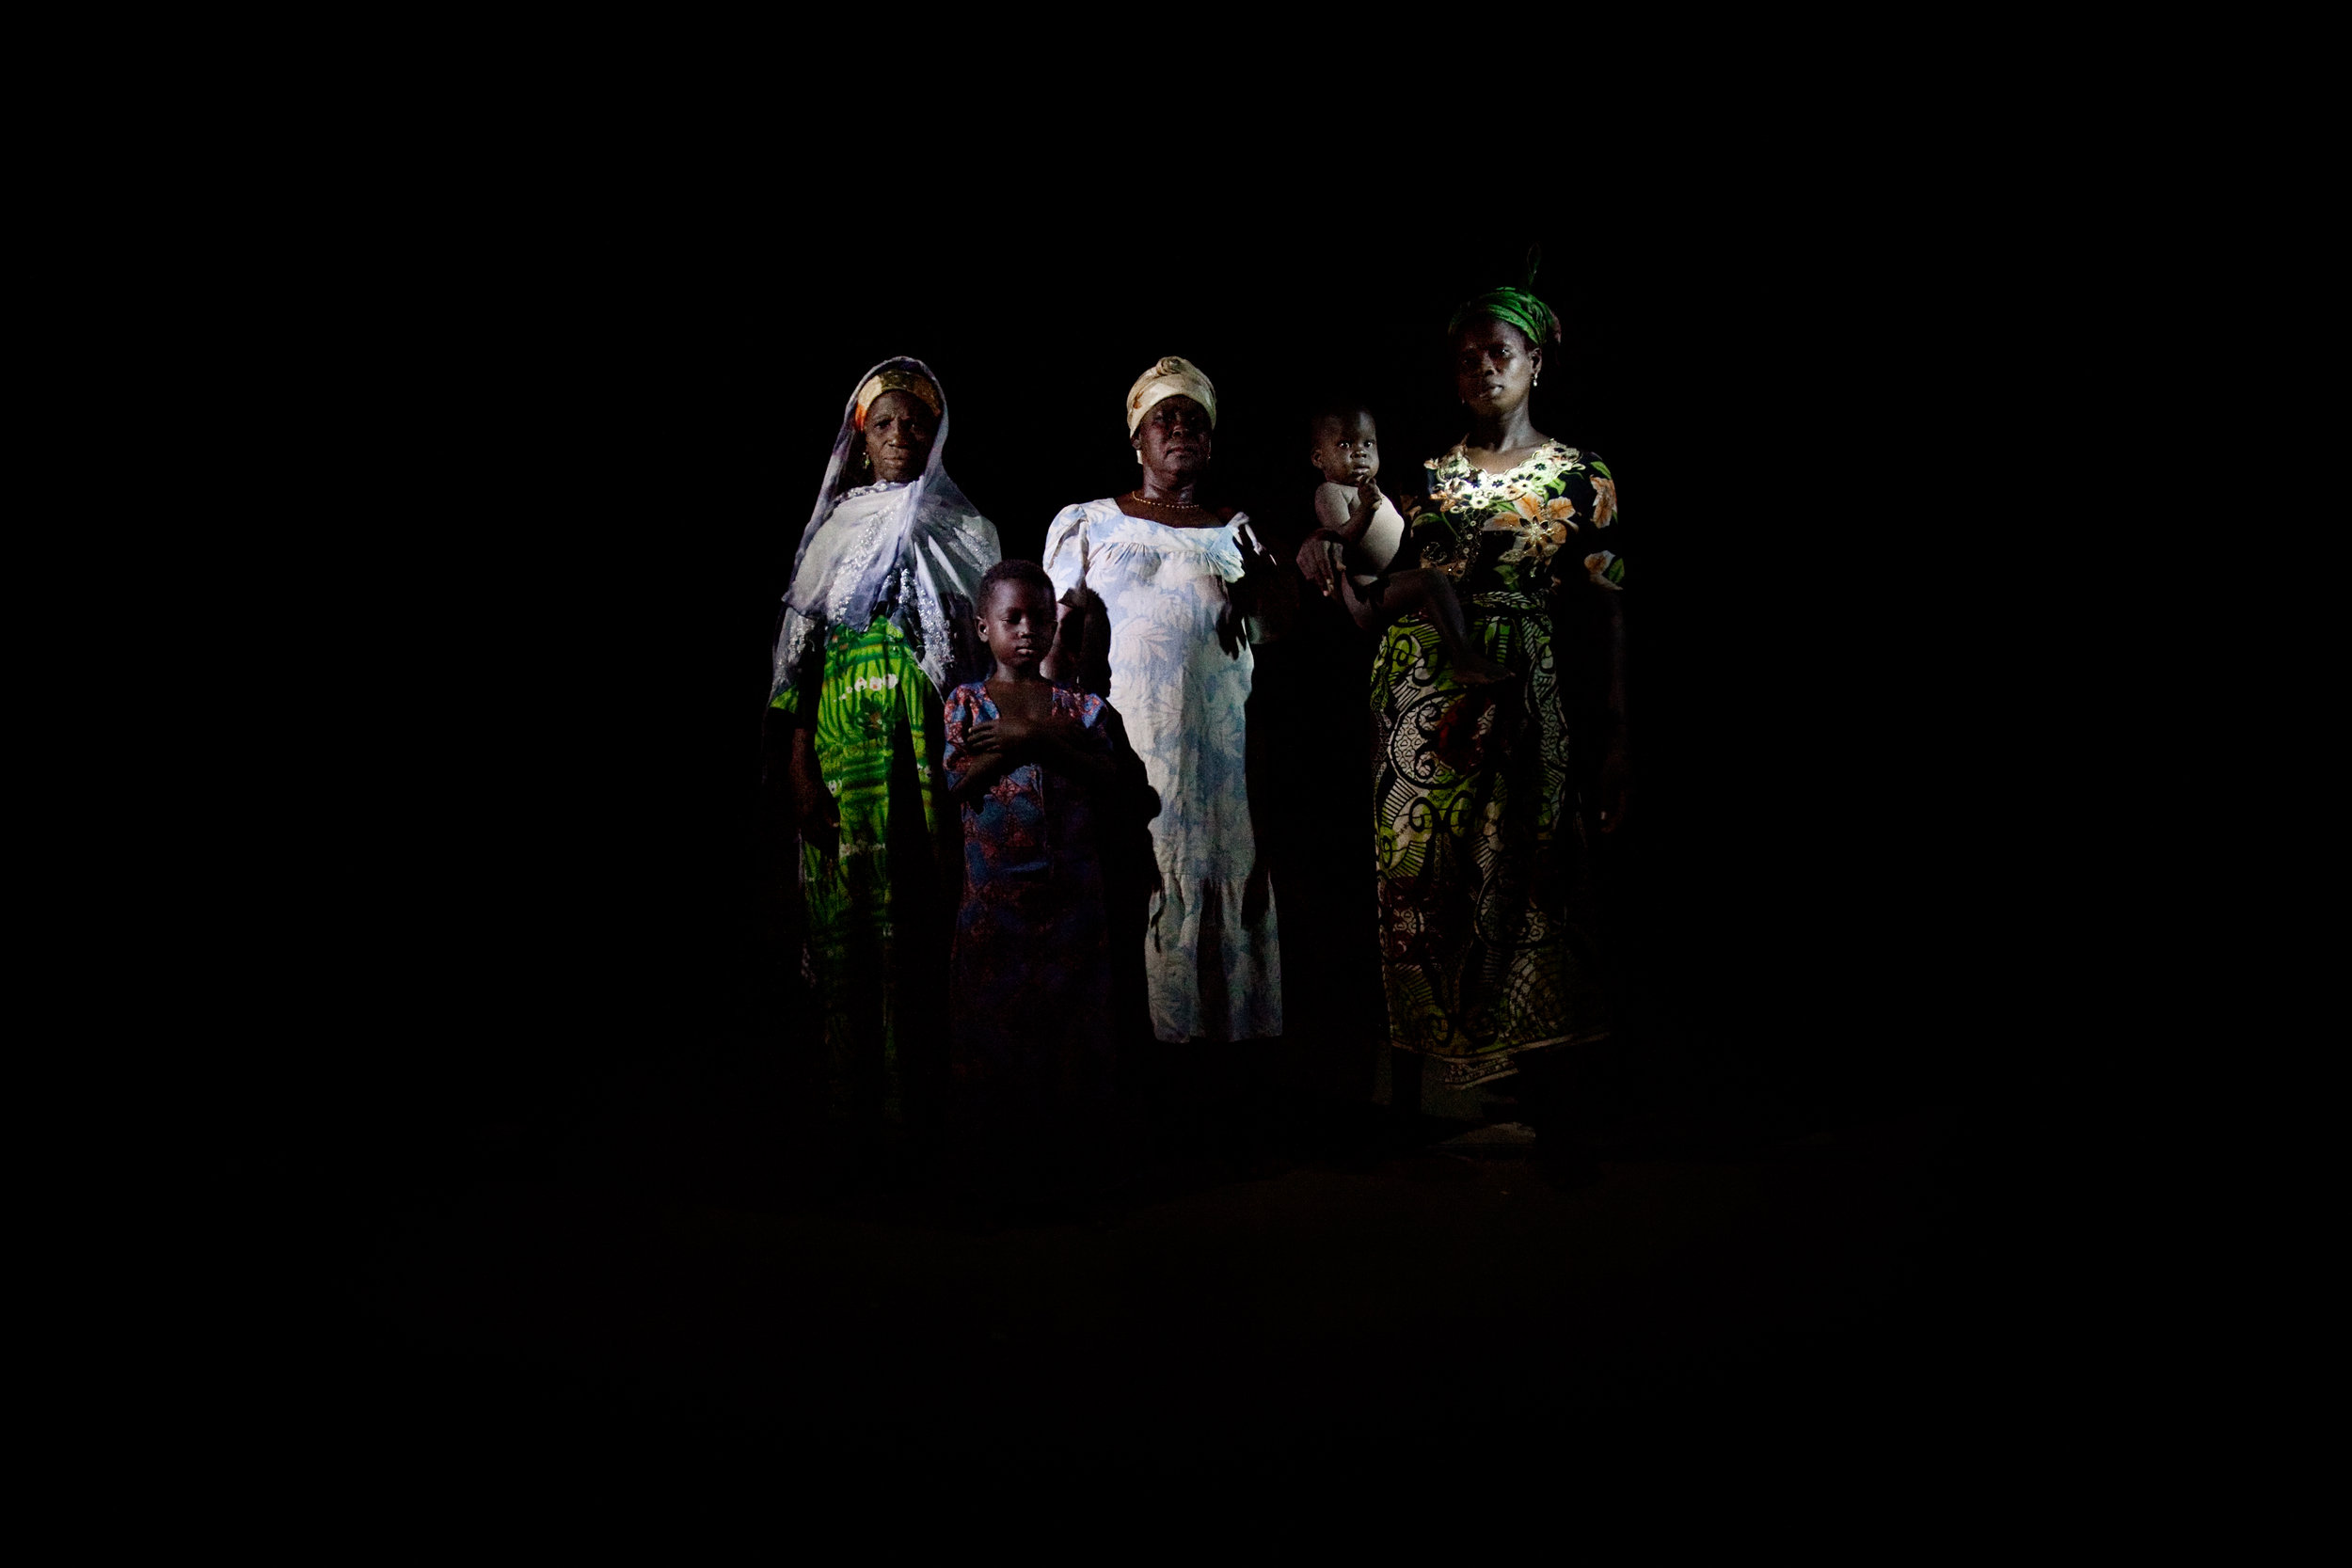  The women and children of the Abubakari household pose for a portrait lit with flashlights in Voggu, Northern Region, Ghana on Feb. 20, 2010. Women bear the heaviest burden of living without electricity, as they walk for miles to fetch firewood and 